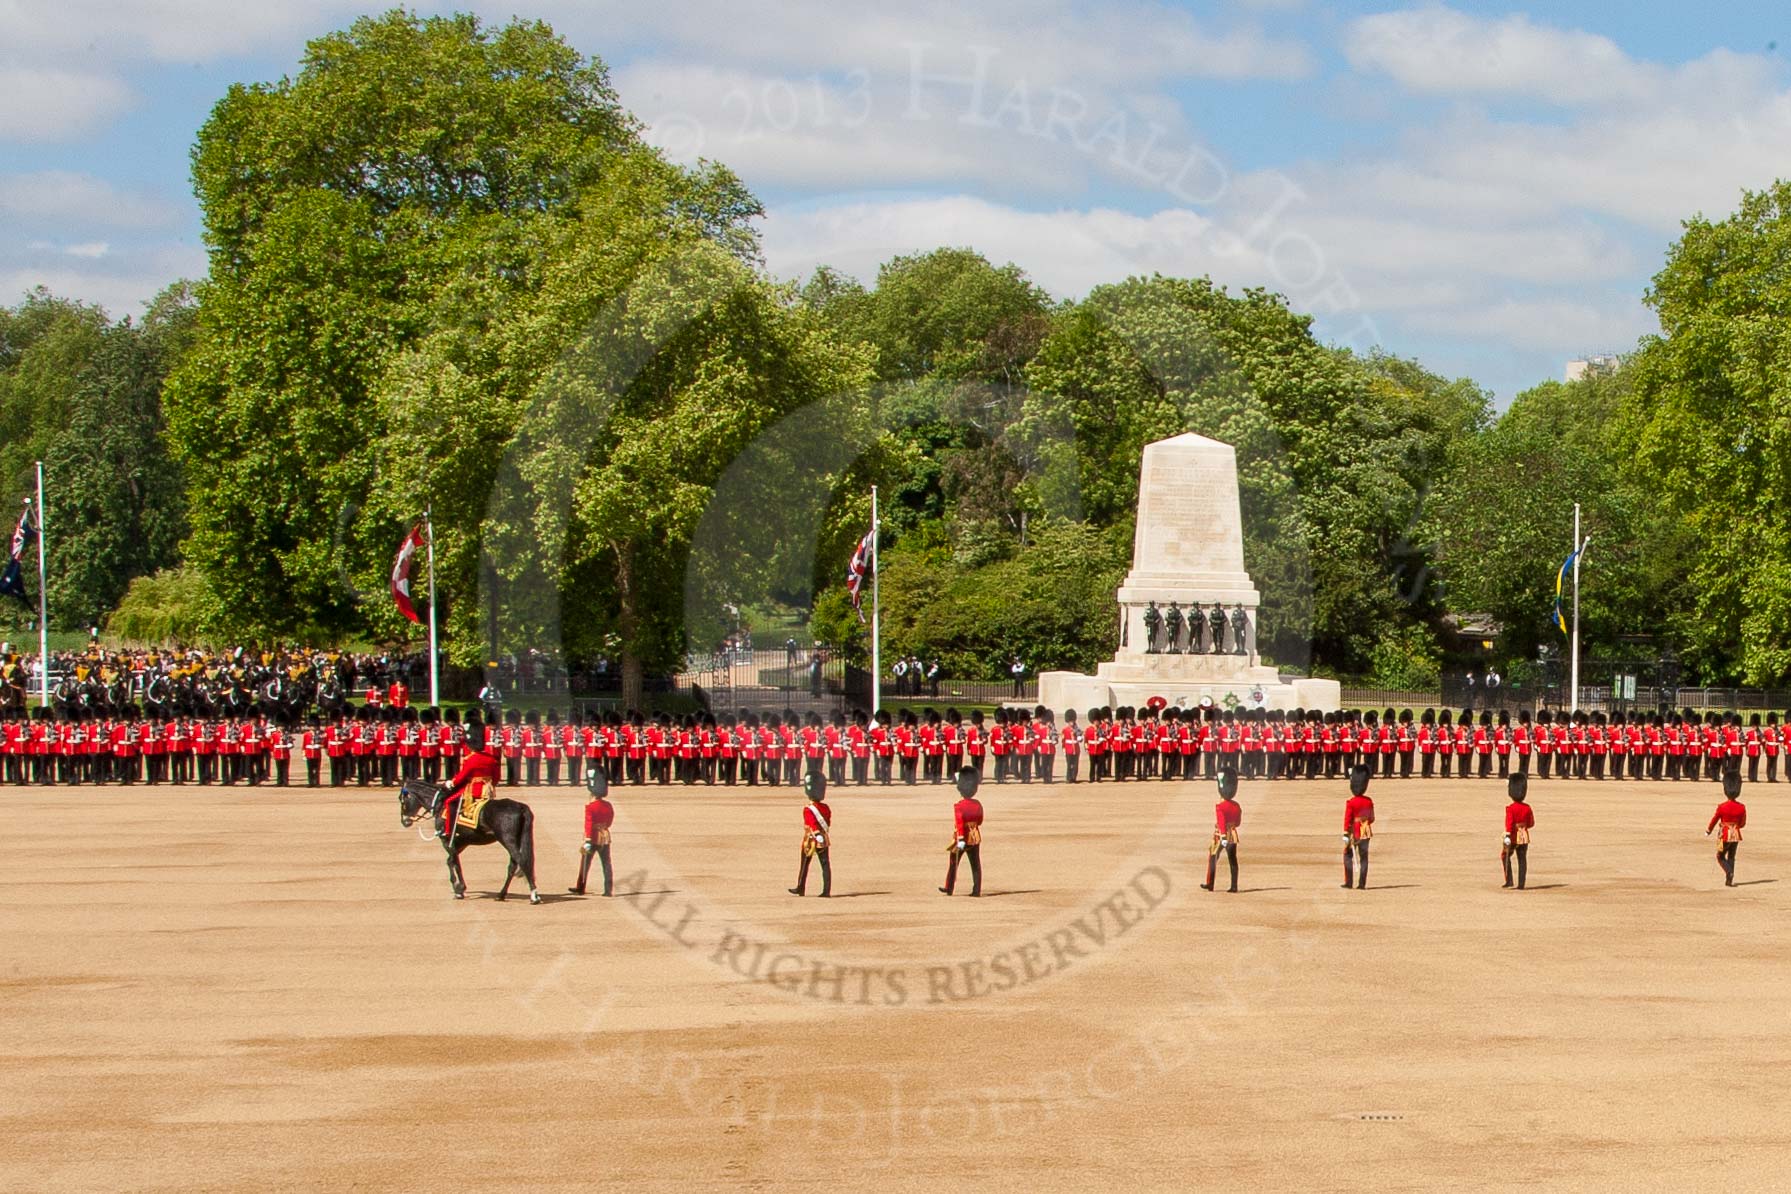 The Colonel's Review 2013: The eighteen officers are marching back towards their Guards, flanked by the Major and the Adjutant of the Parade..
Horse Guards Parade, Westminster,
London SW1,

United Kingdom,
on 08 June 2013 at 10:41, image #196